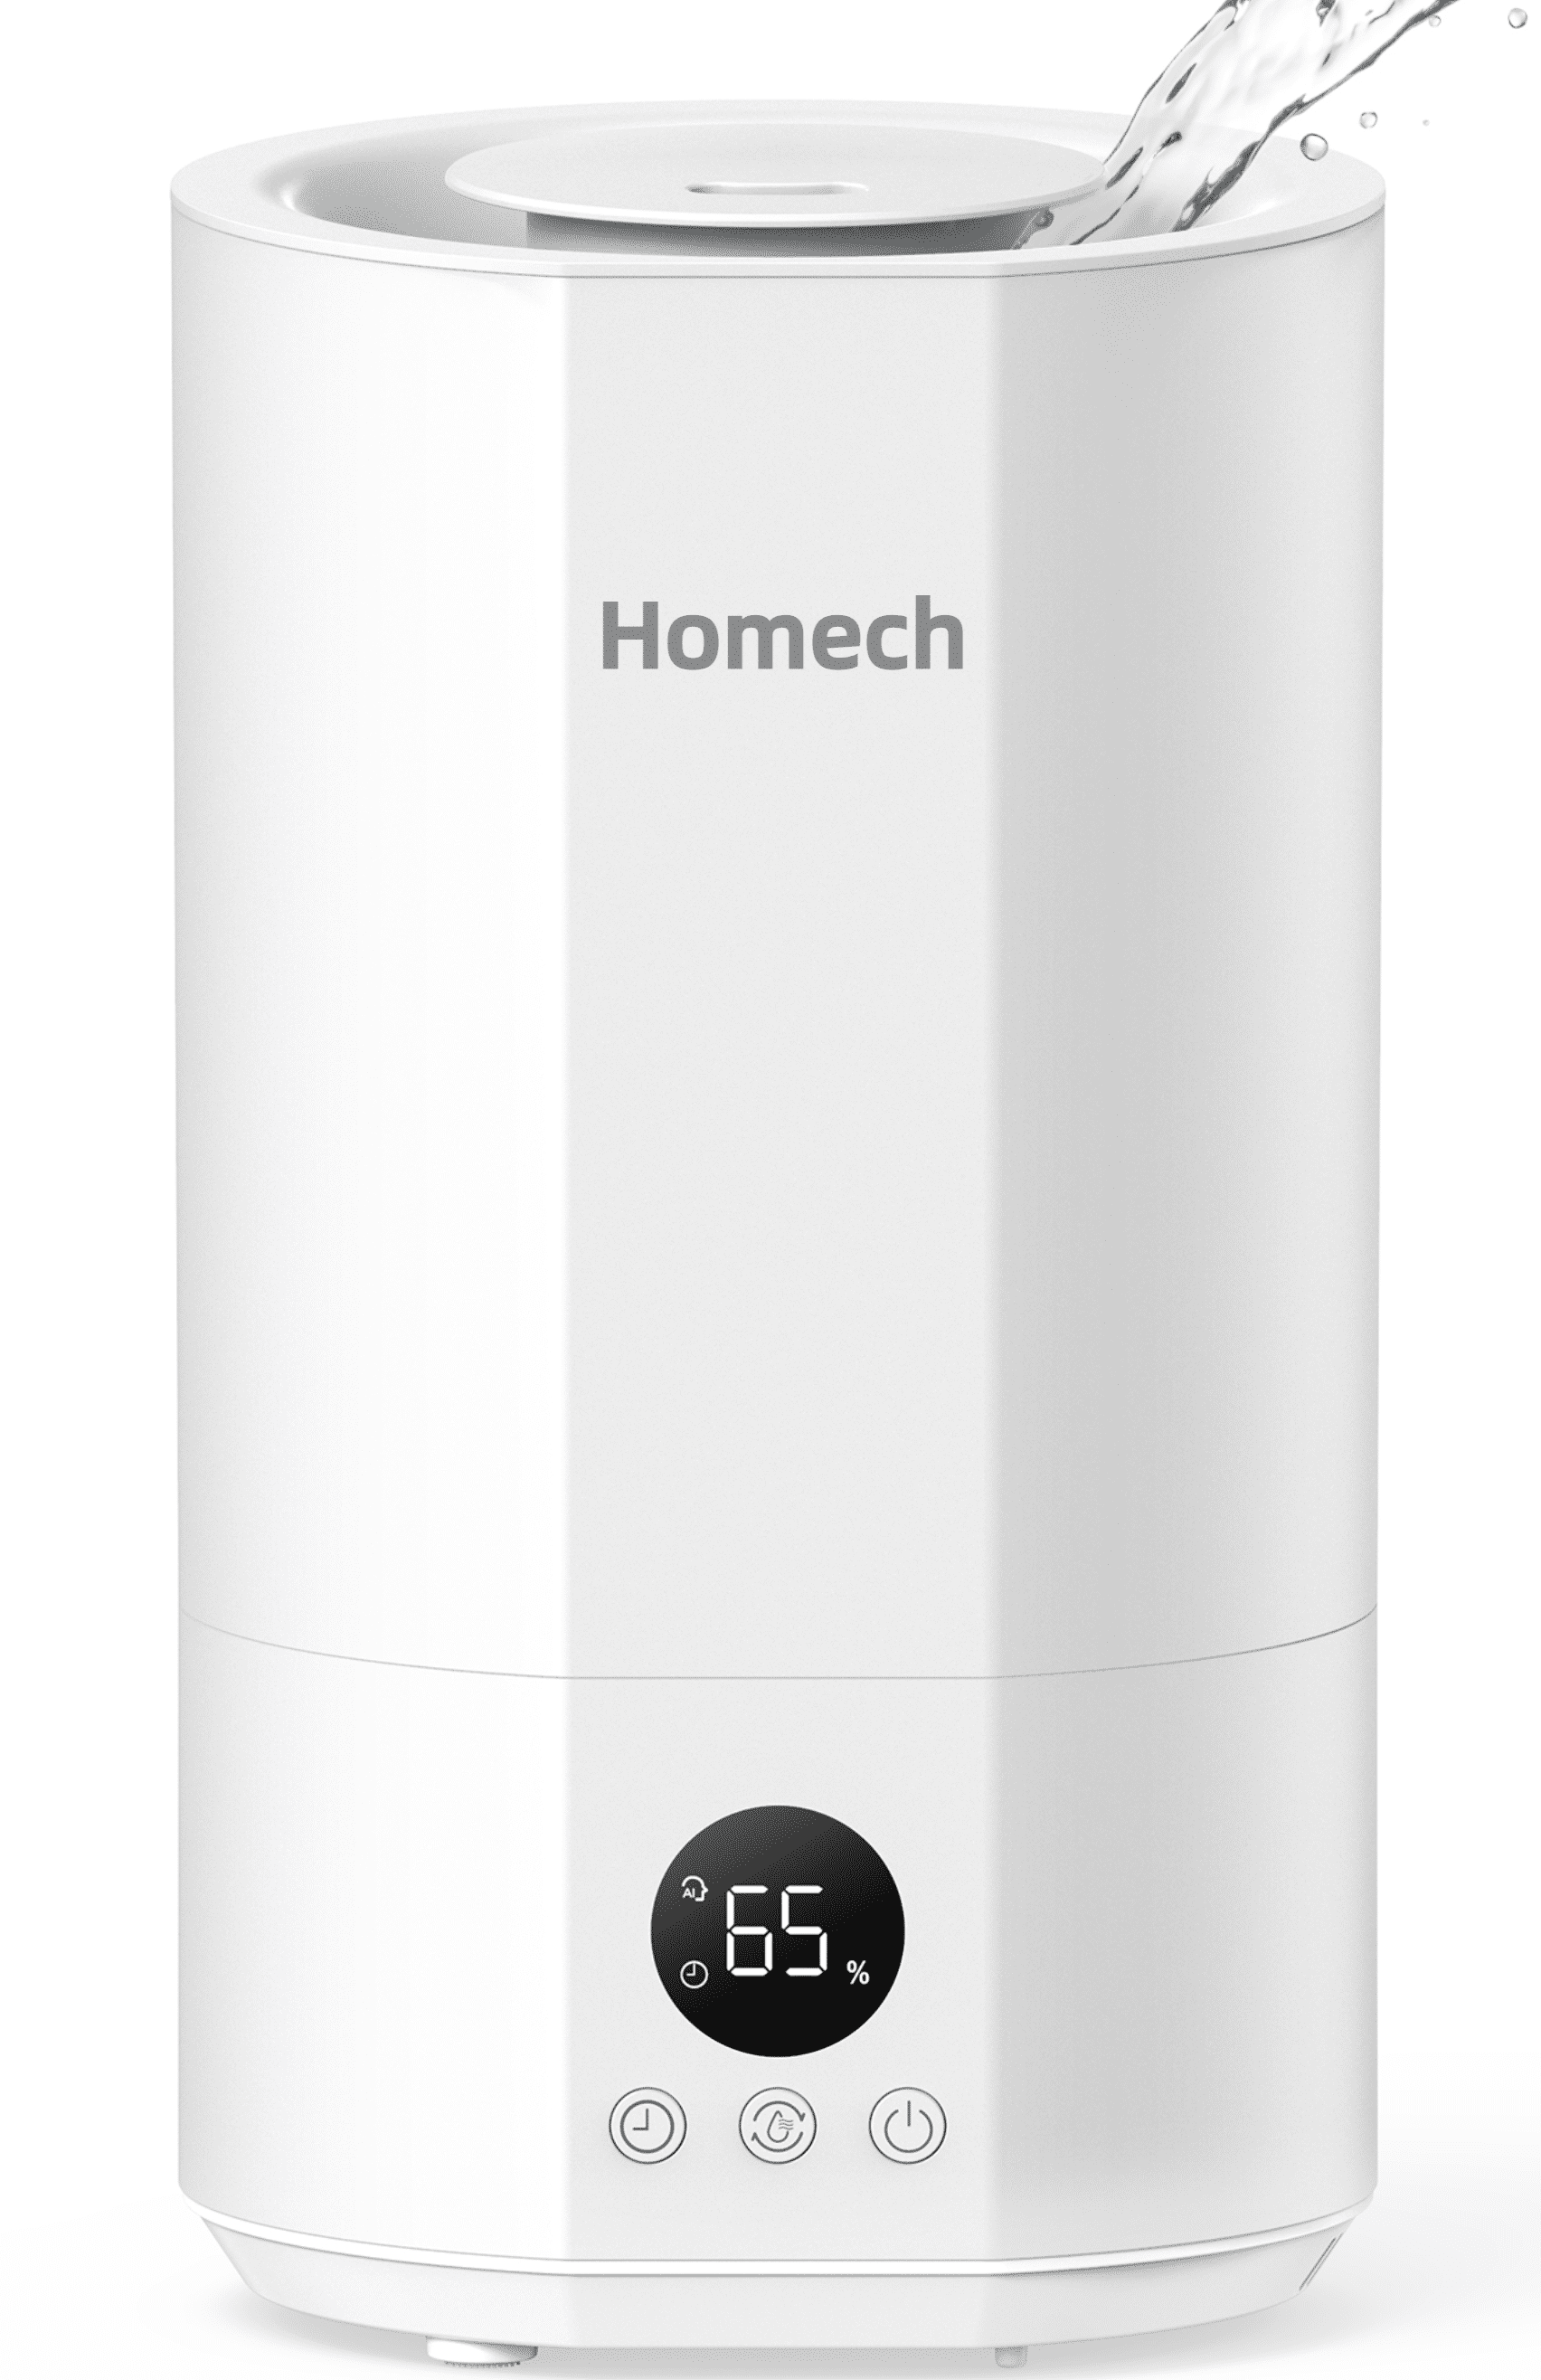 Homech-Humidifier-Top-Fill-1-Gal-4L-Air-Humidifier-Large-Room-Humidifiers-for-Home-Bedroom-with-12H-Timer-AI-Mode-Adjustable-3-Mist-Level-White_484eee87-a275-427d-9466-a14462fc6f83.6df855095d9def1abca6ae3e2dfe818d.png